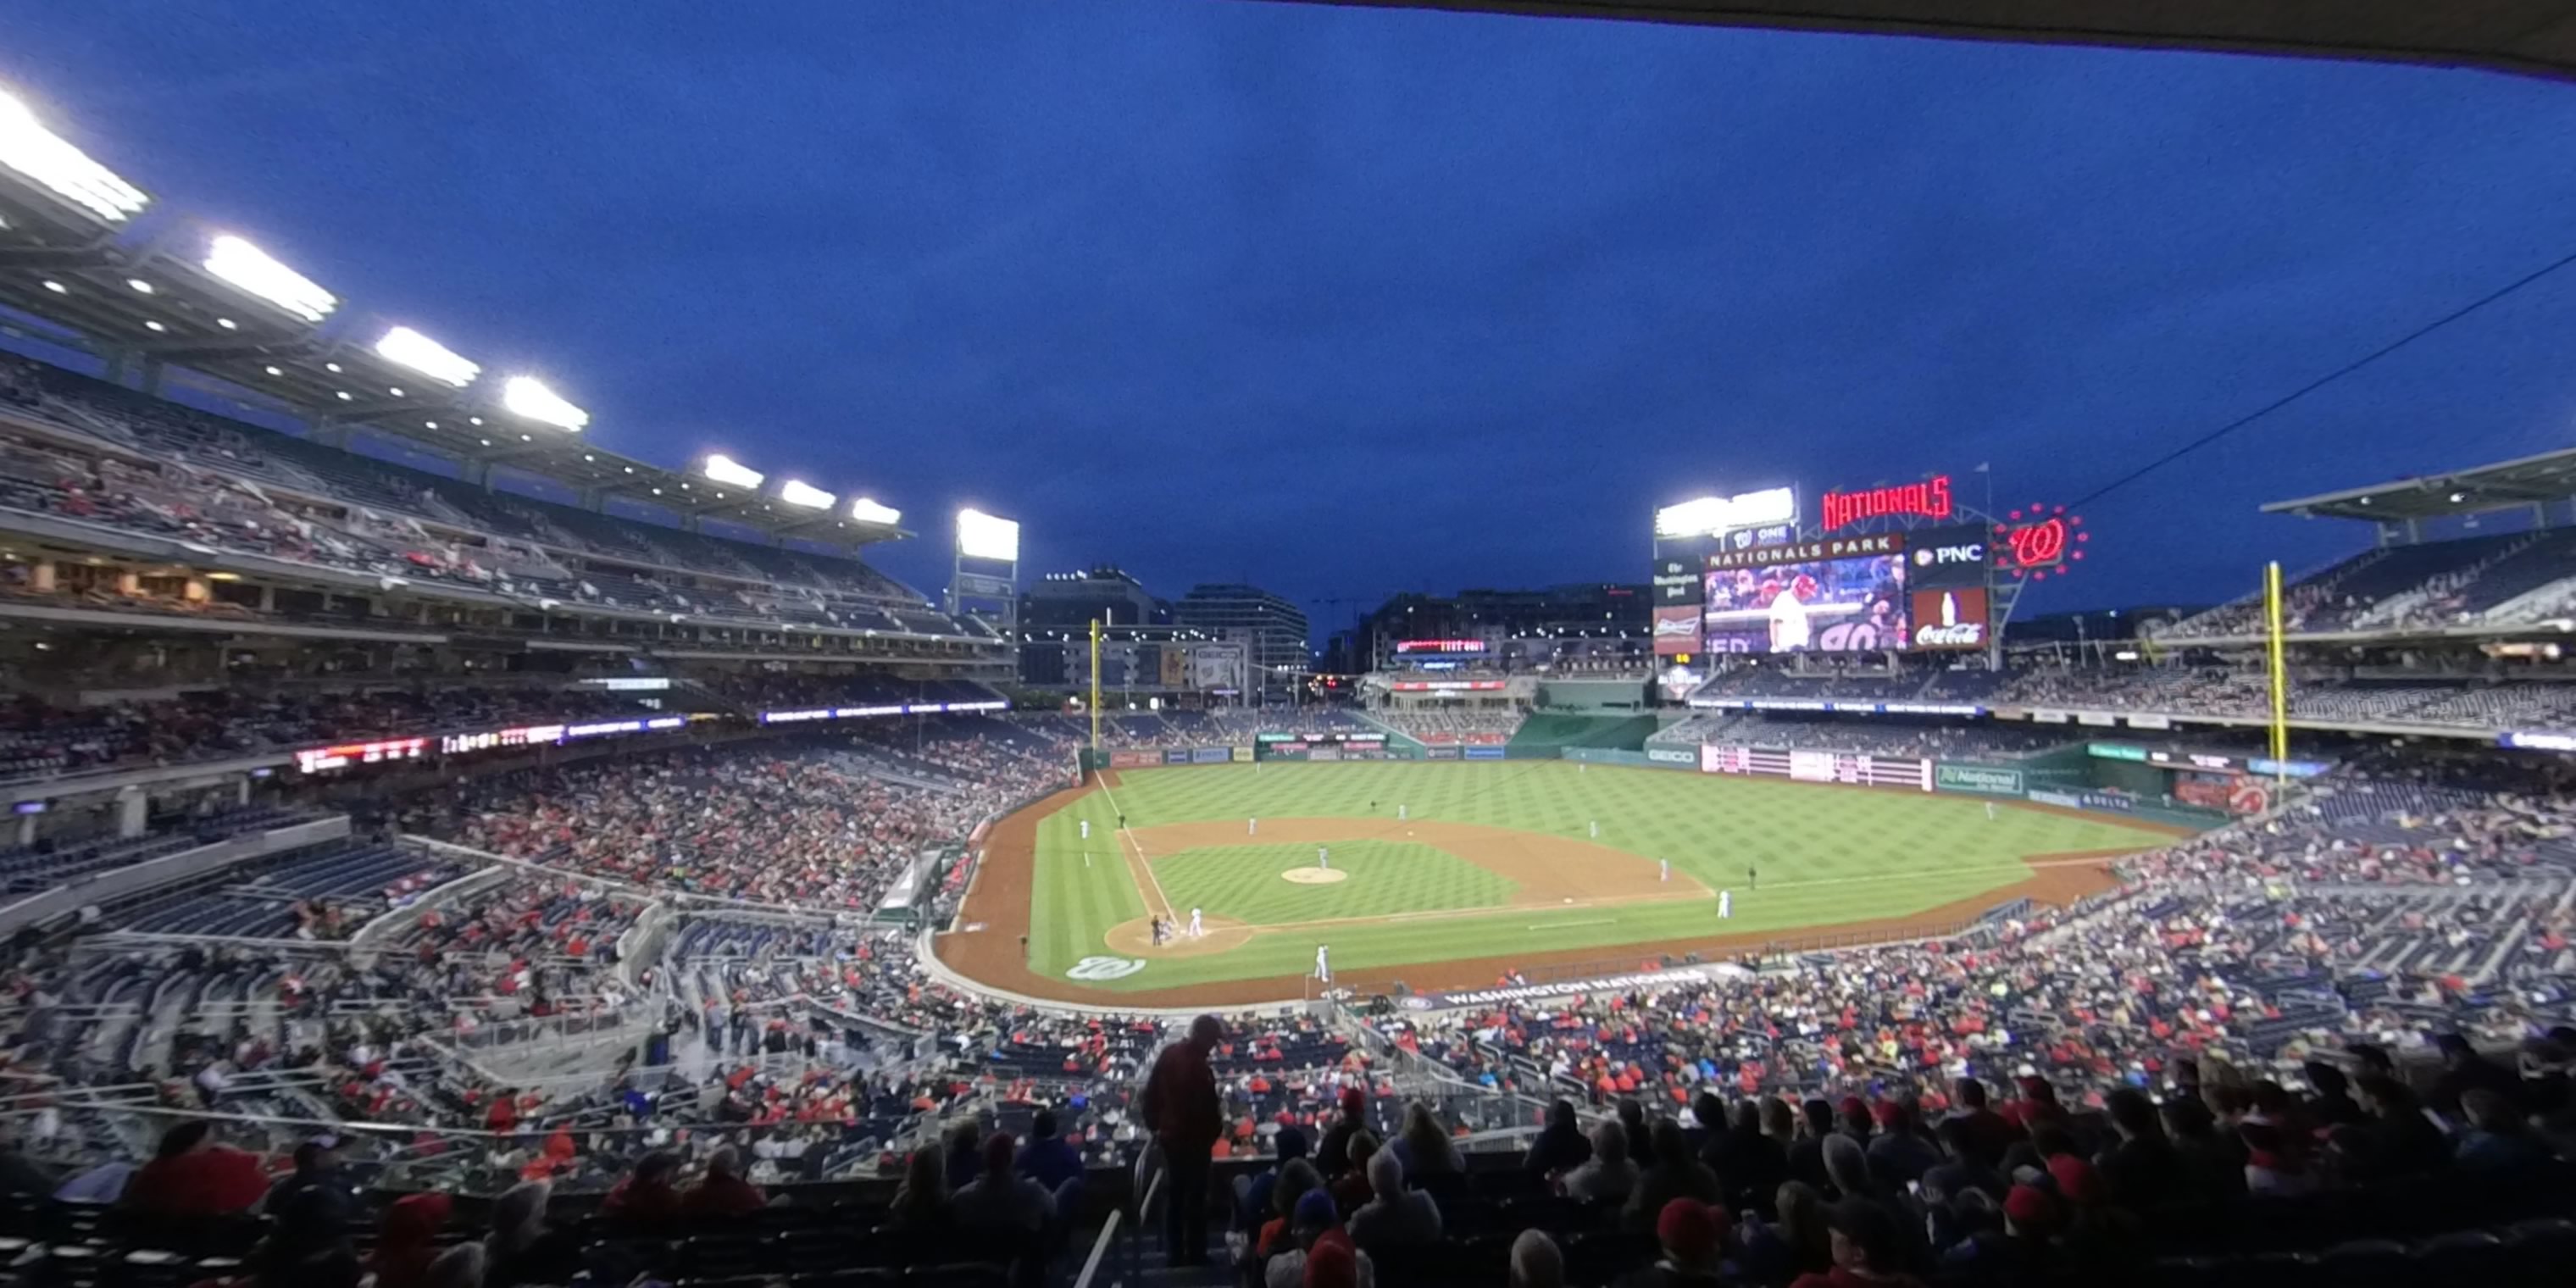 section 216 panoramic seat view  for baseball - nationals park